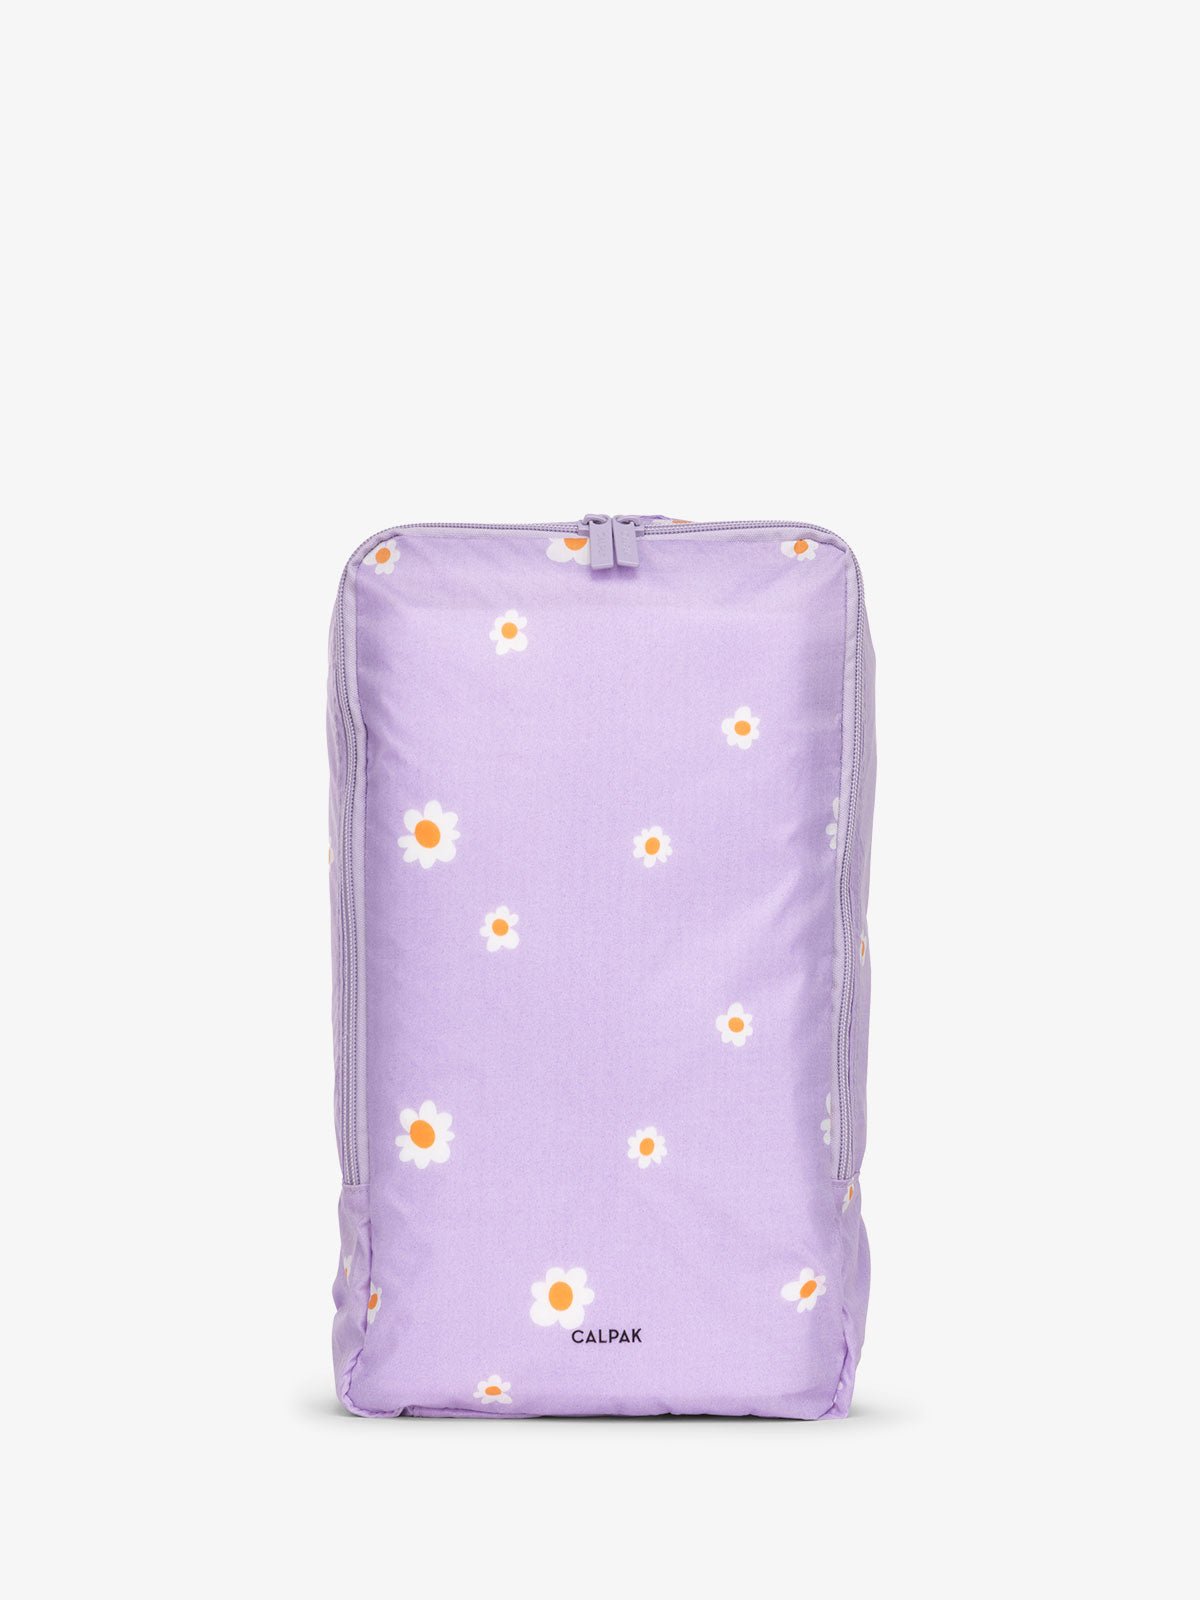 CALPAK Compakt shoe storage travel bag with handle in orchid fields lavender